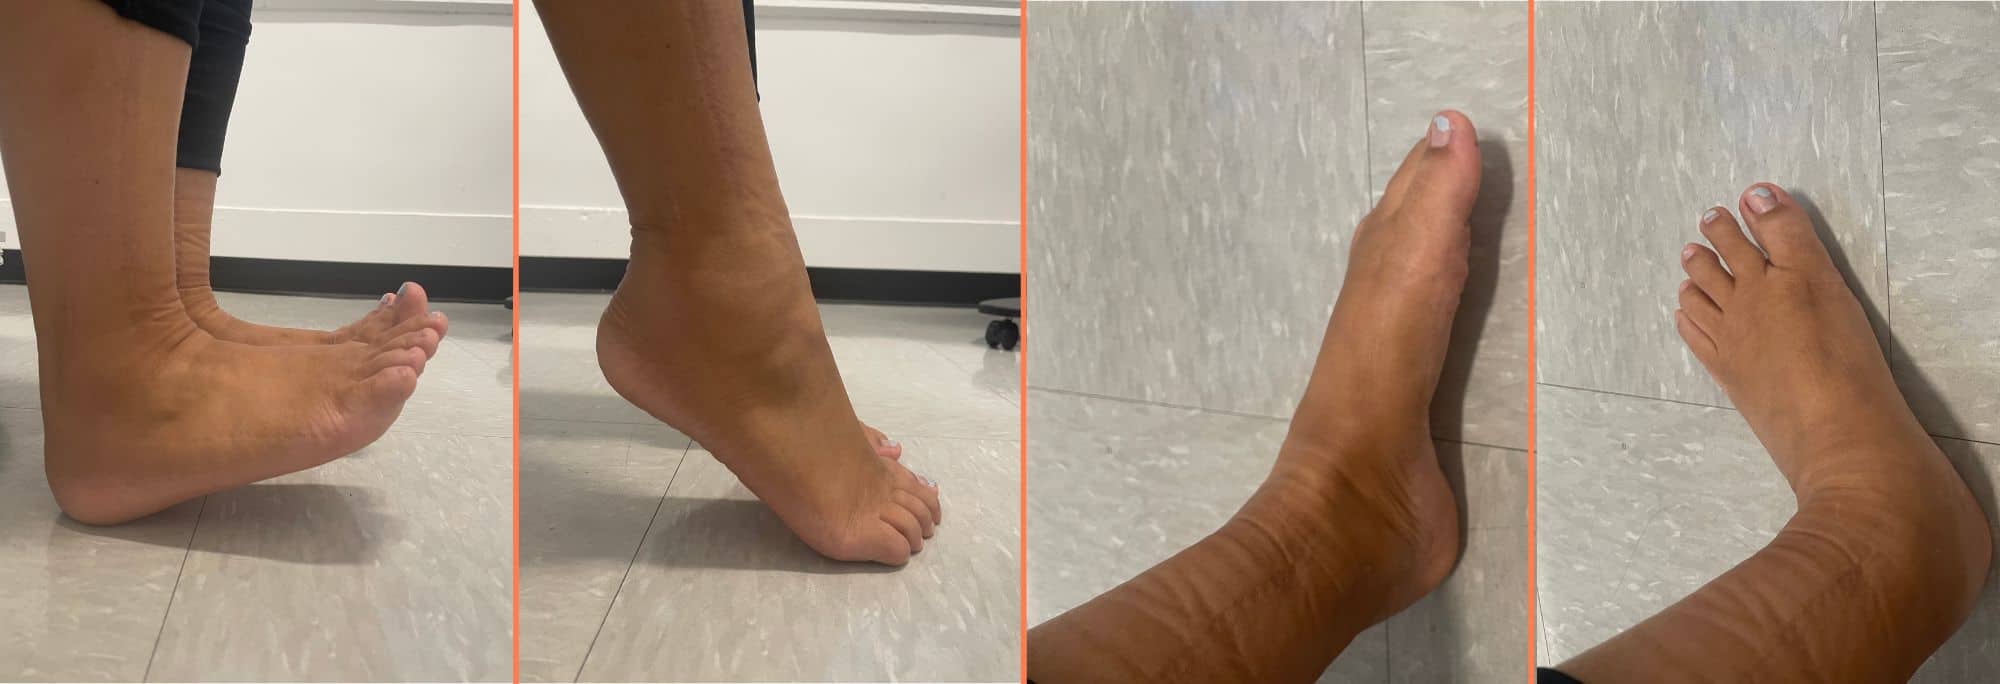 How Can Physical Therapy Help My Ankle? - Body Harmony Physical Therapy